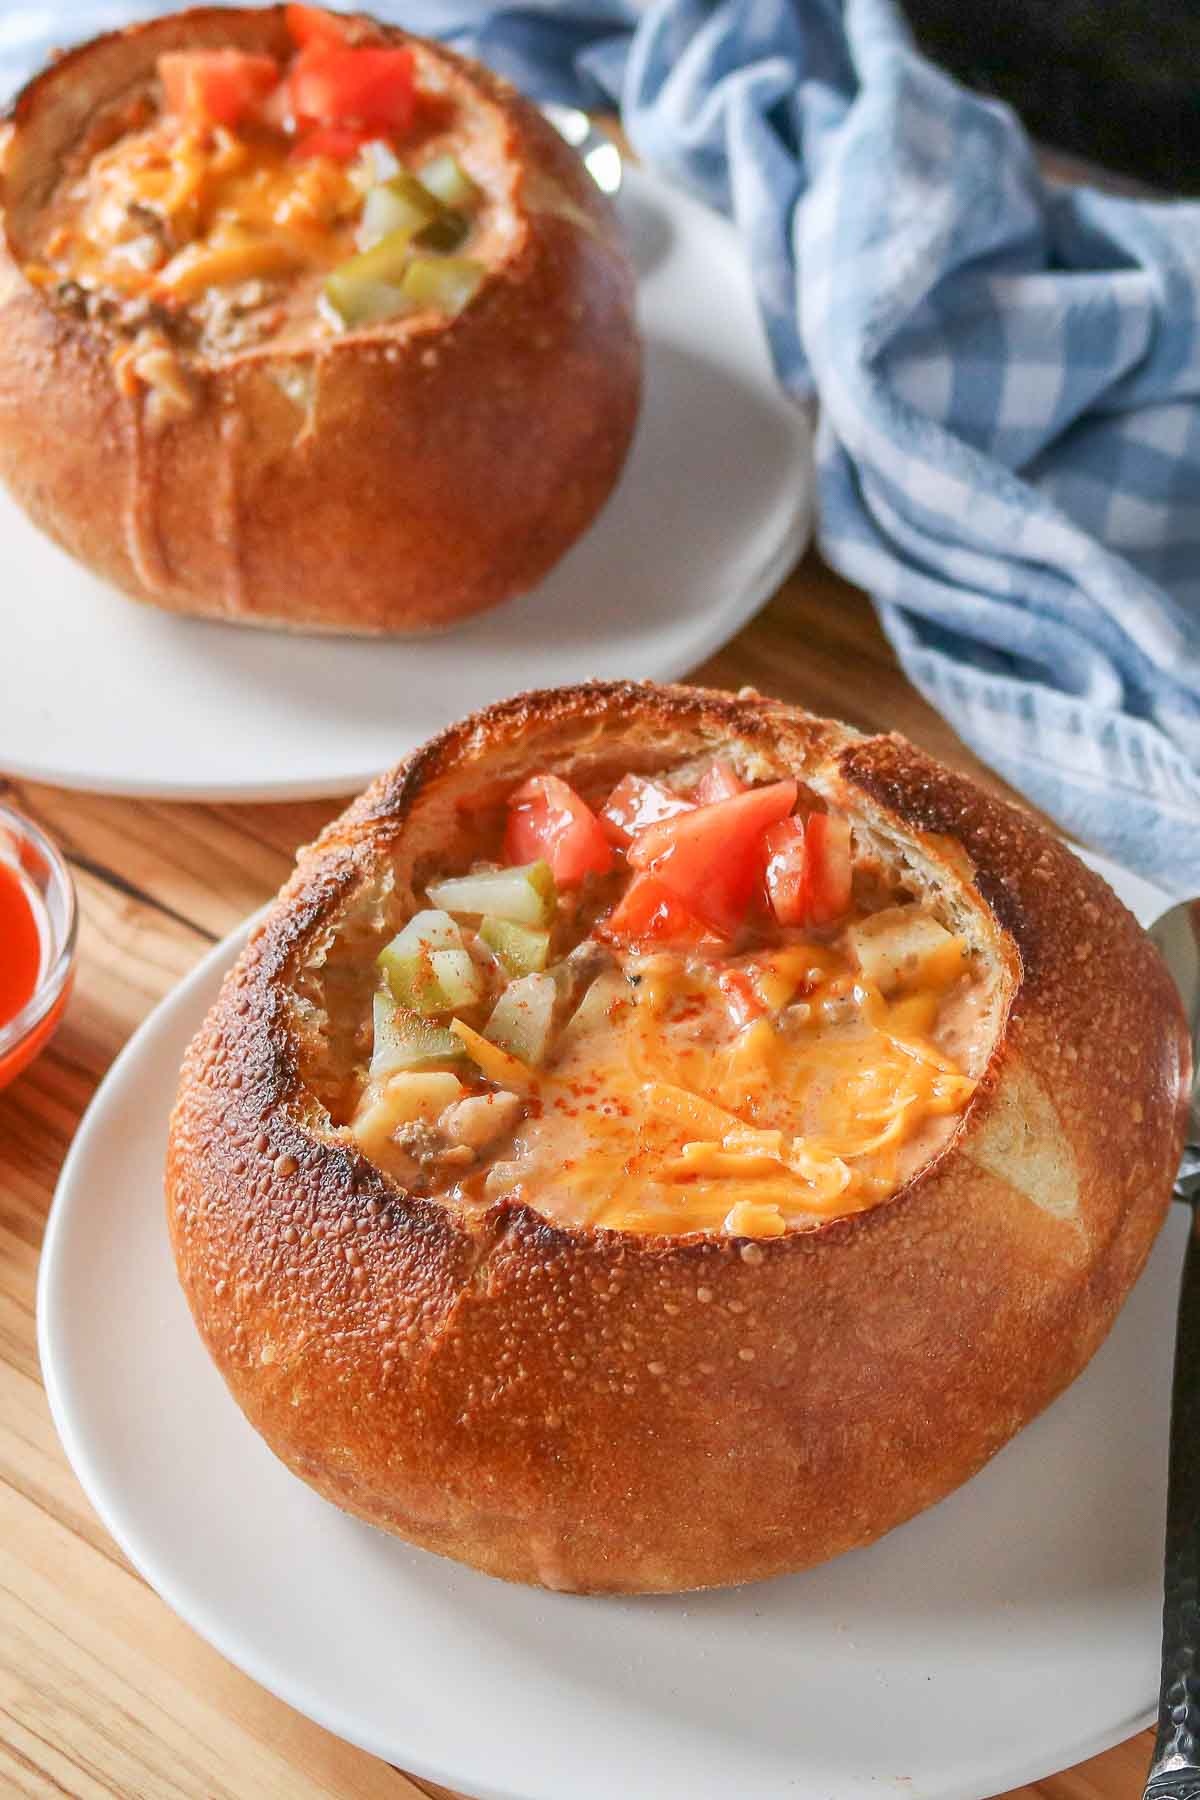 Two bowls of cheeseburger soup in a bread bowl, one in front of the other.